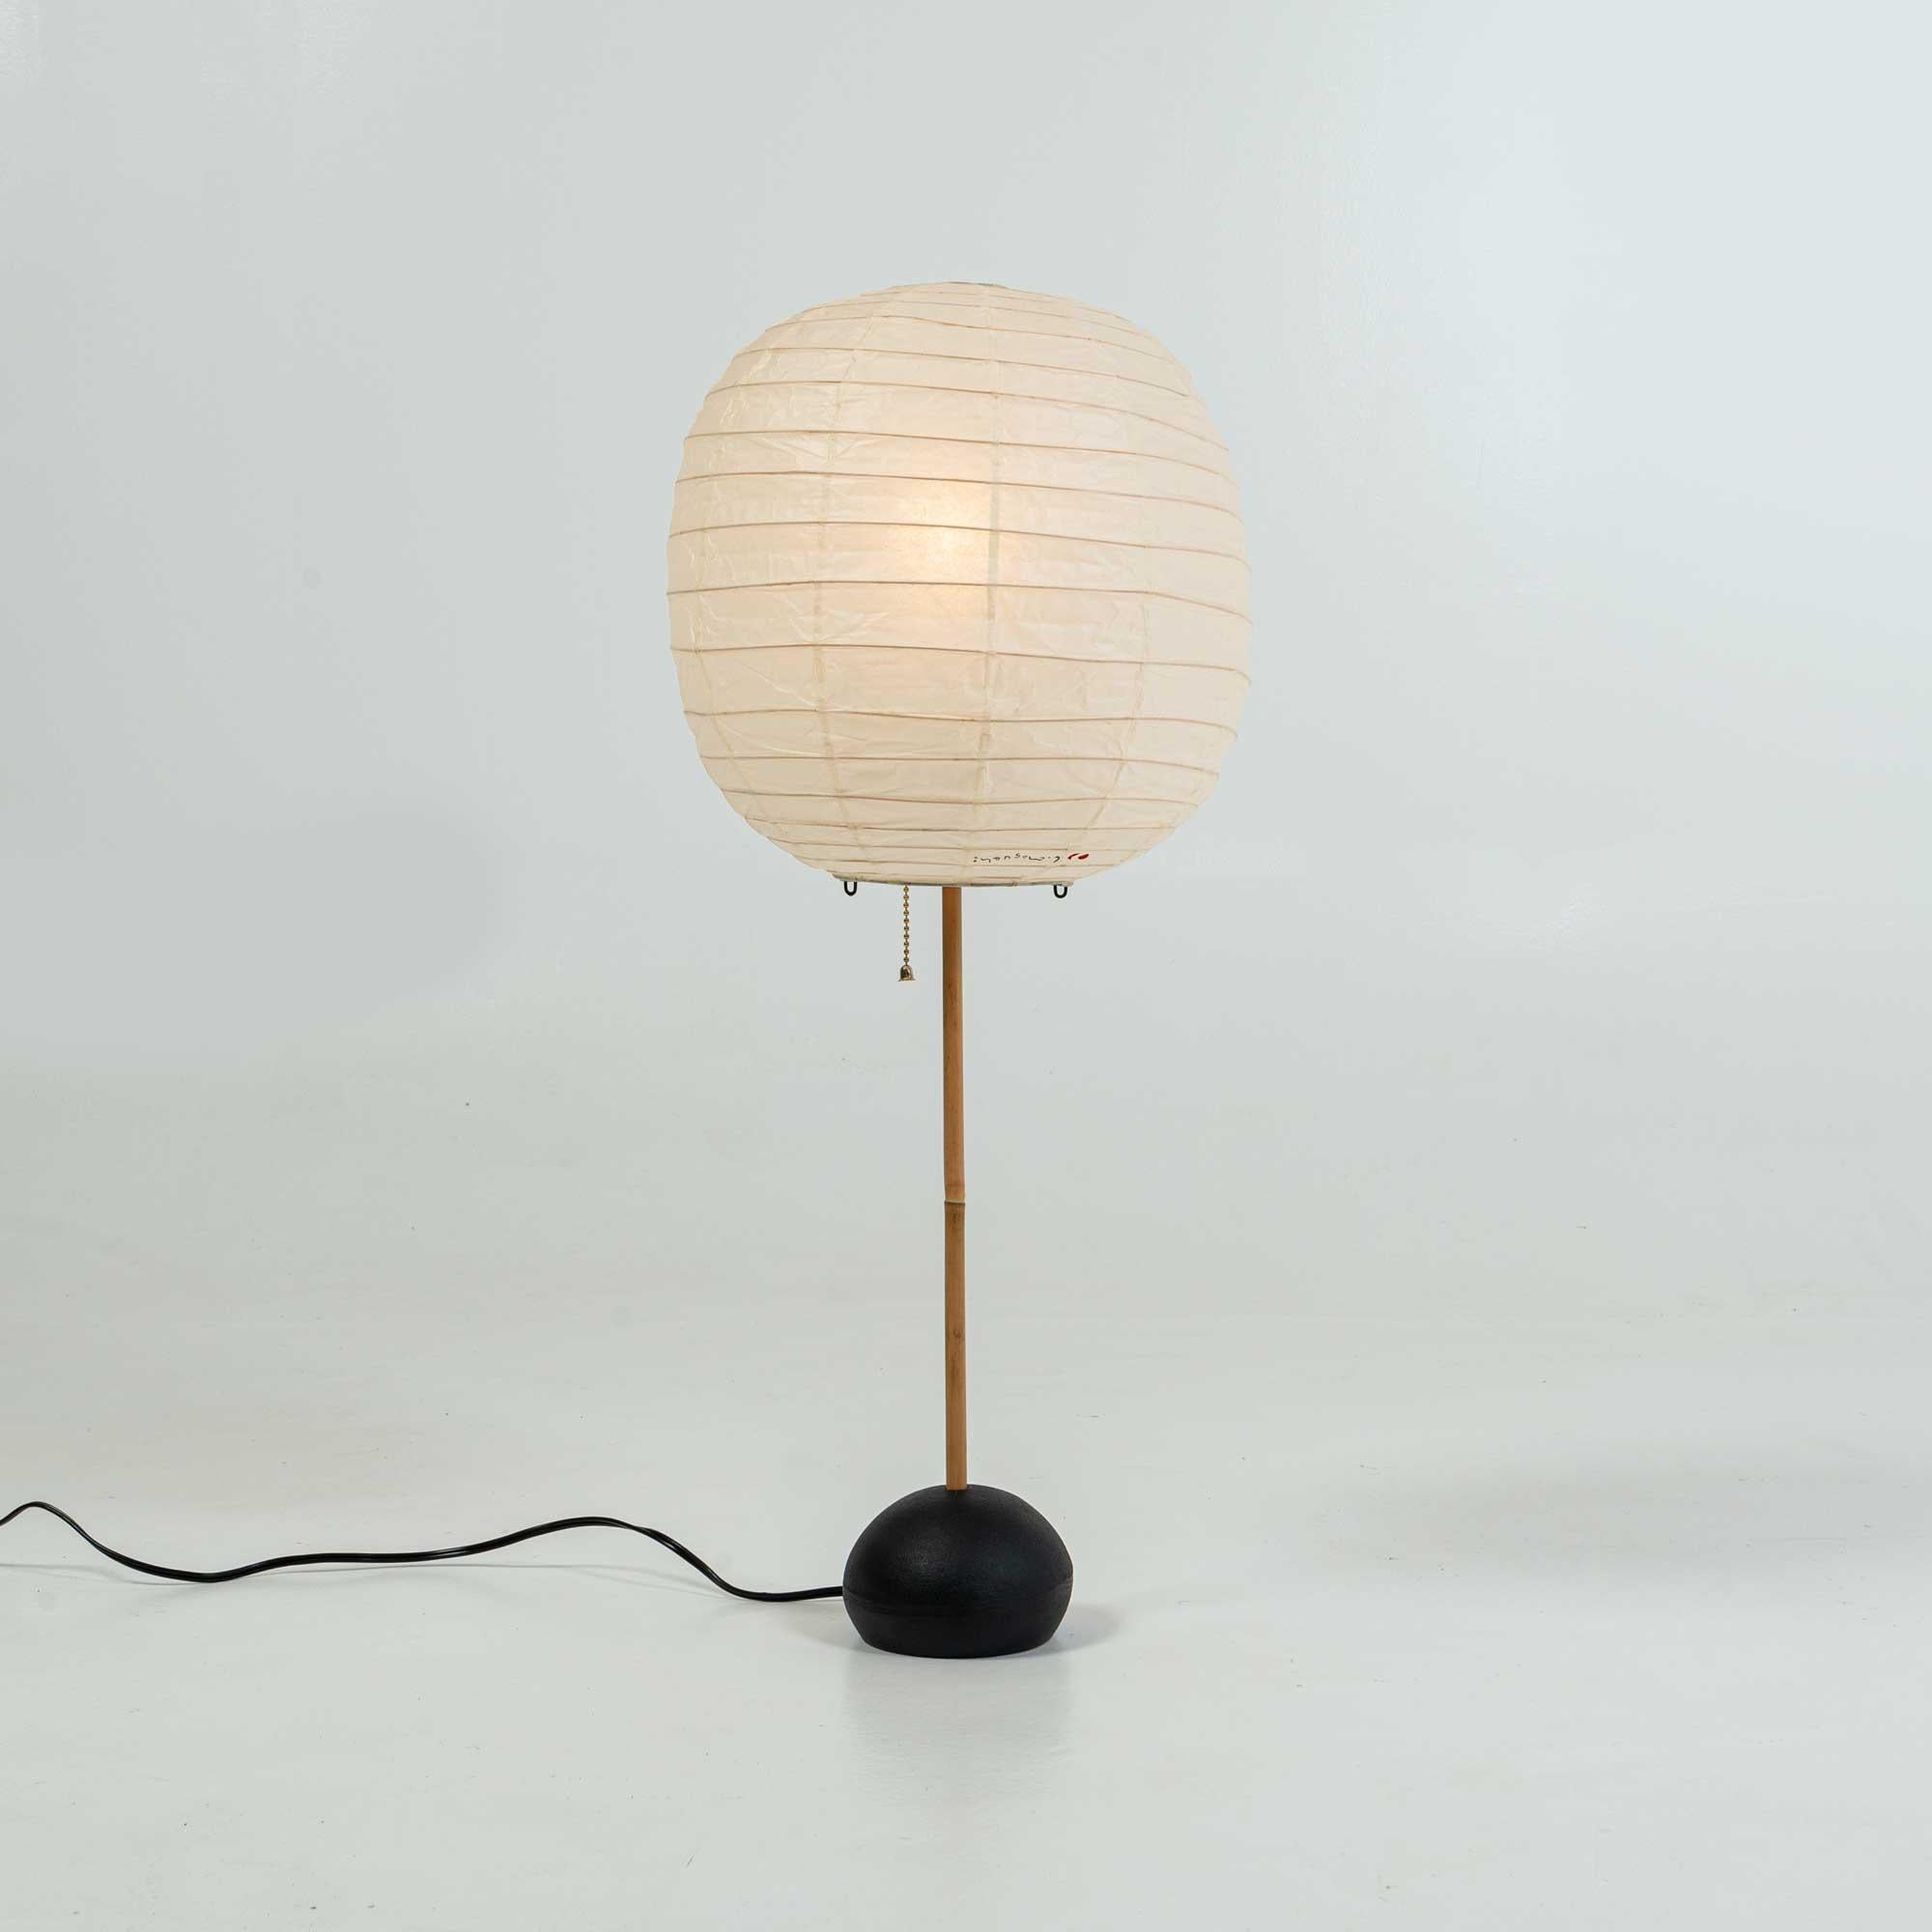 A 1980s production of the Isamu Noguchi Table Lamp, BB1 base with 30F shade. Overall in great condition, some light discoloration on the shade, some patina on the metal base. wired 110v. Ready for use.